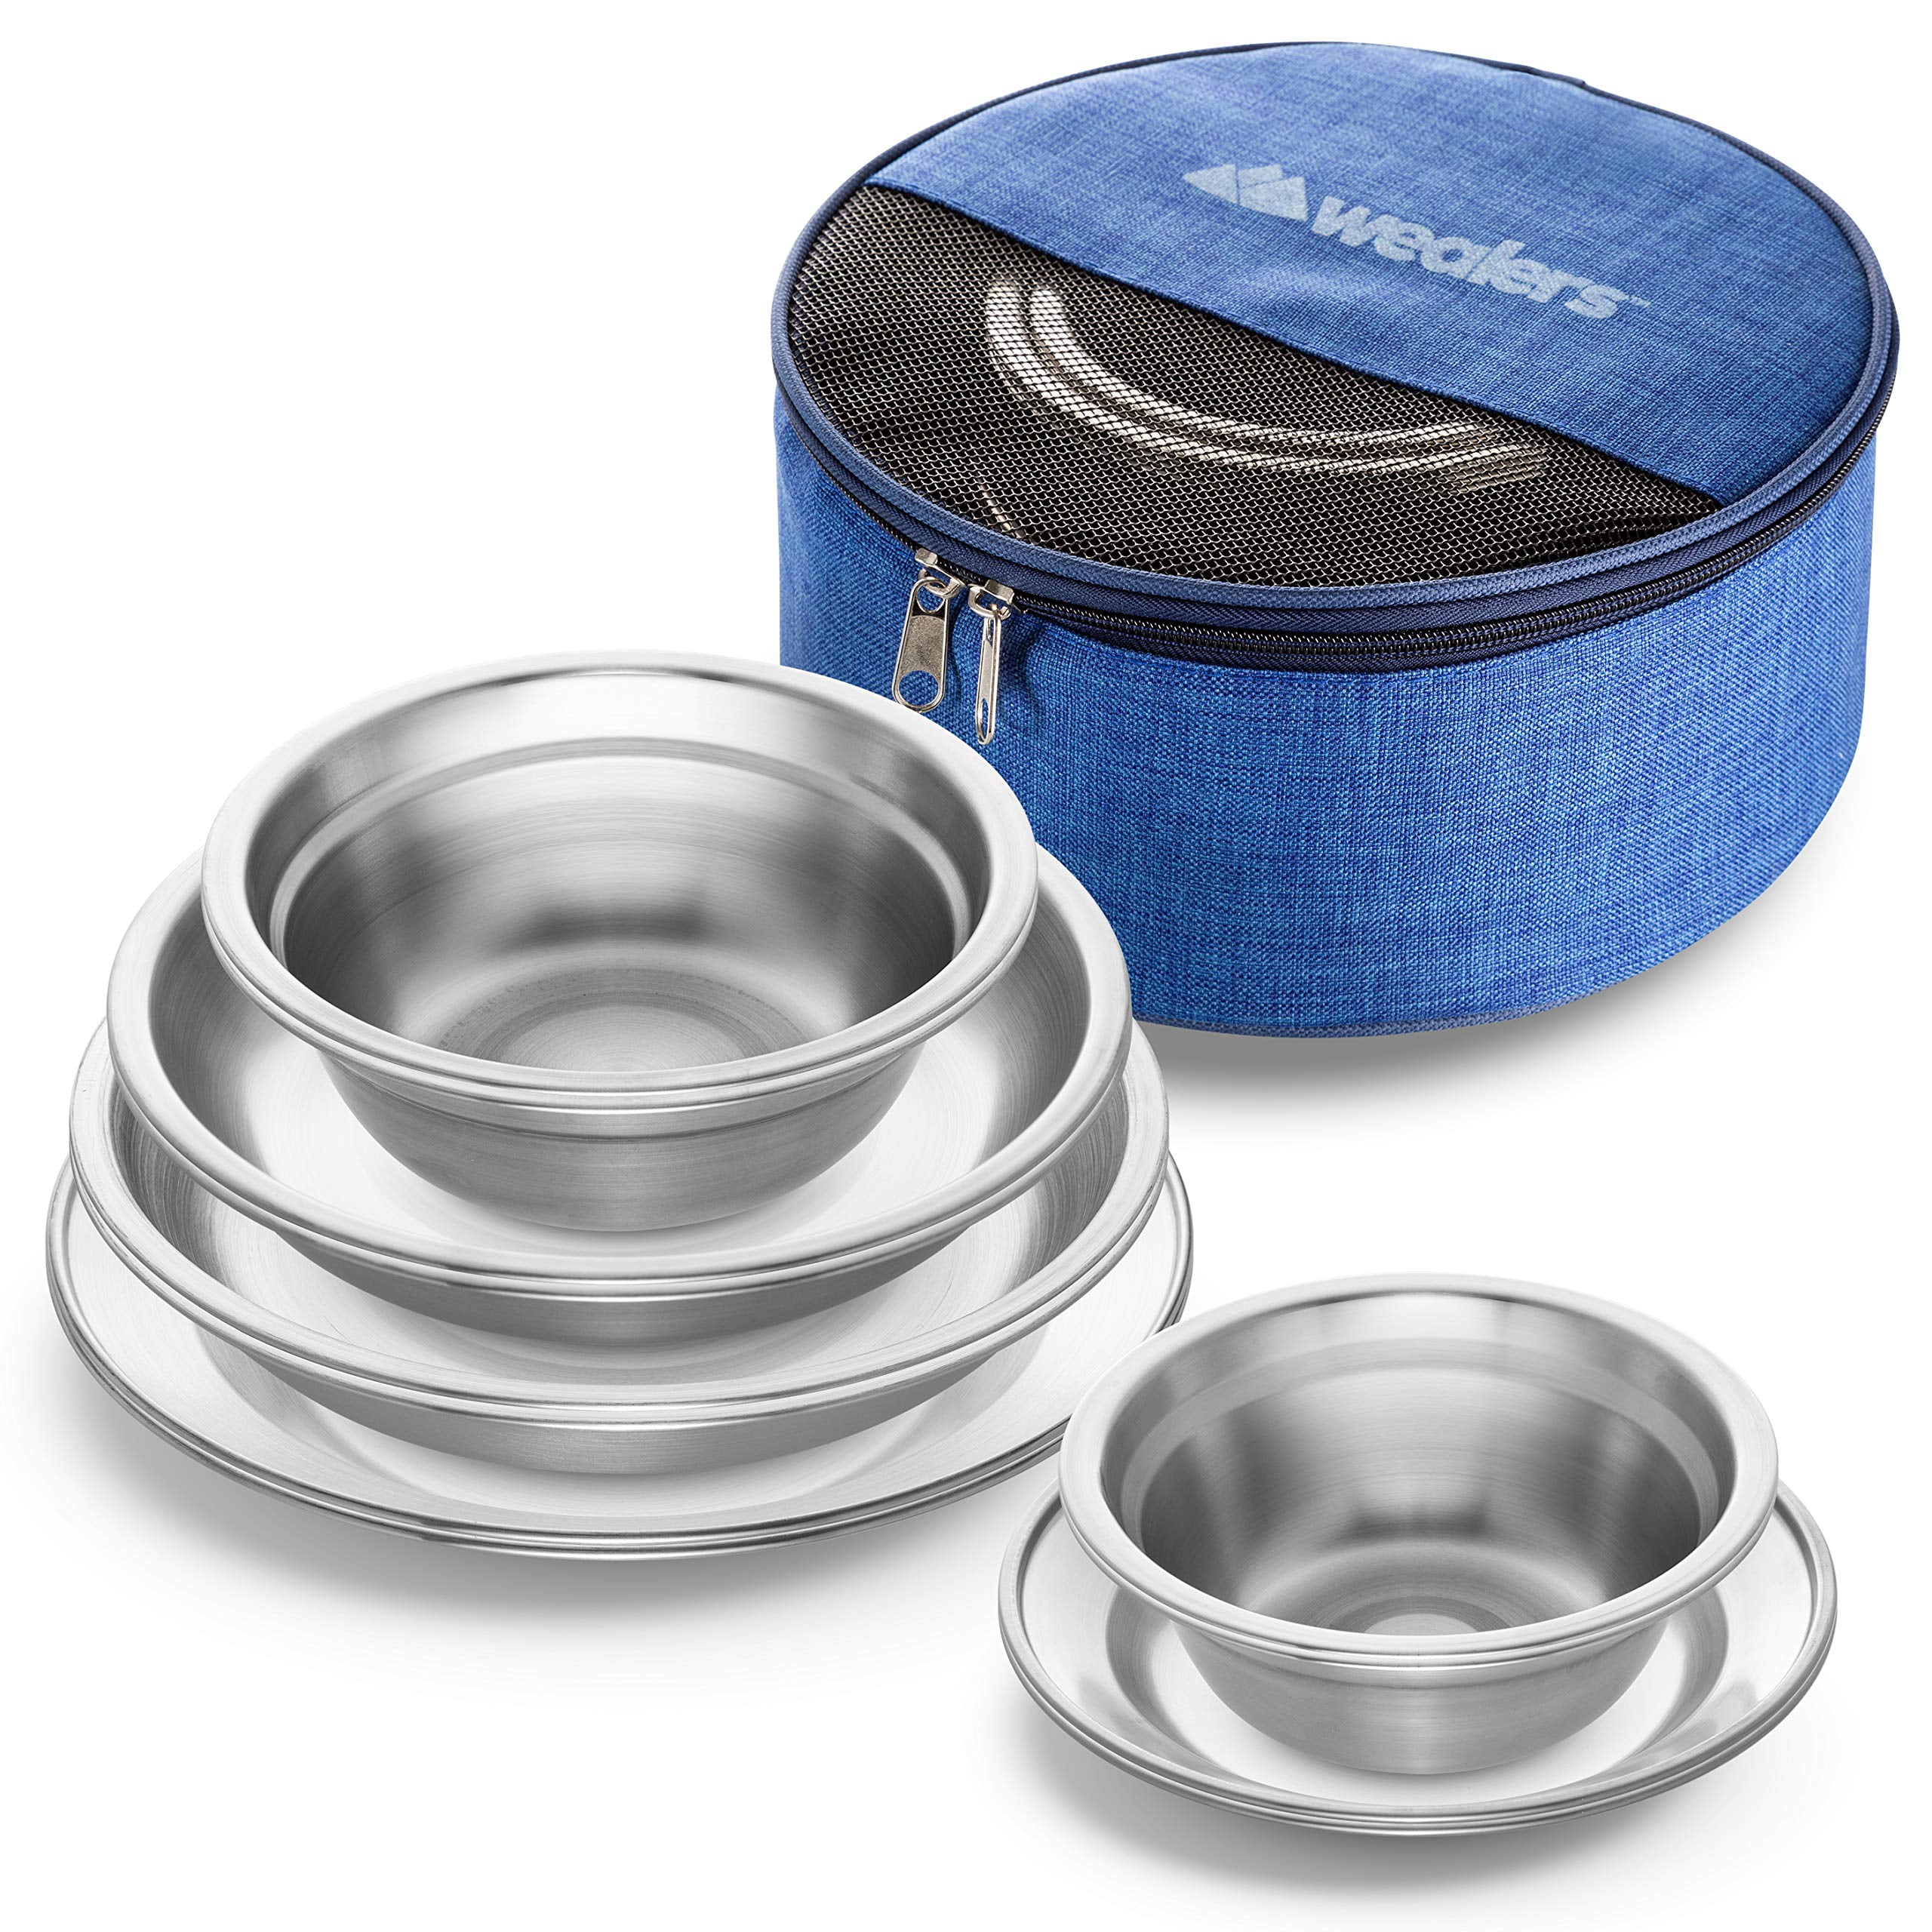 Unique Complete Messware Kit Polished Stainless Steel Dishes Set 